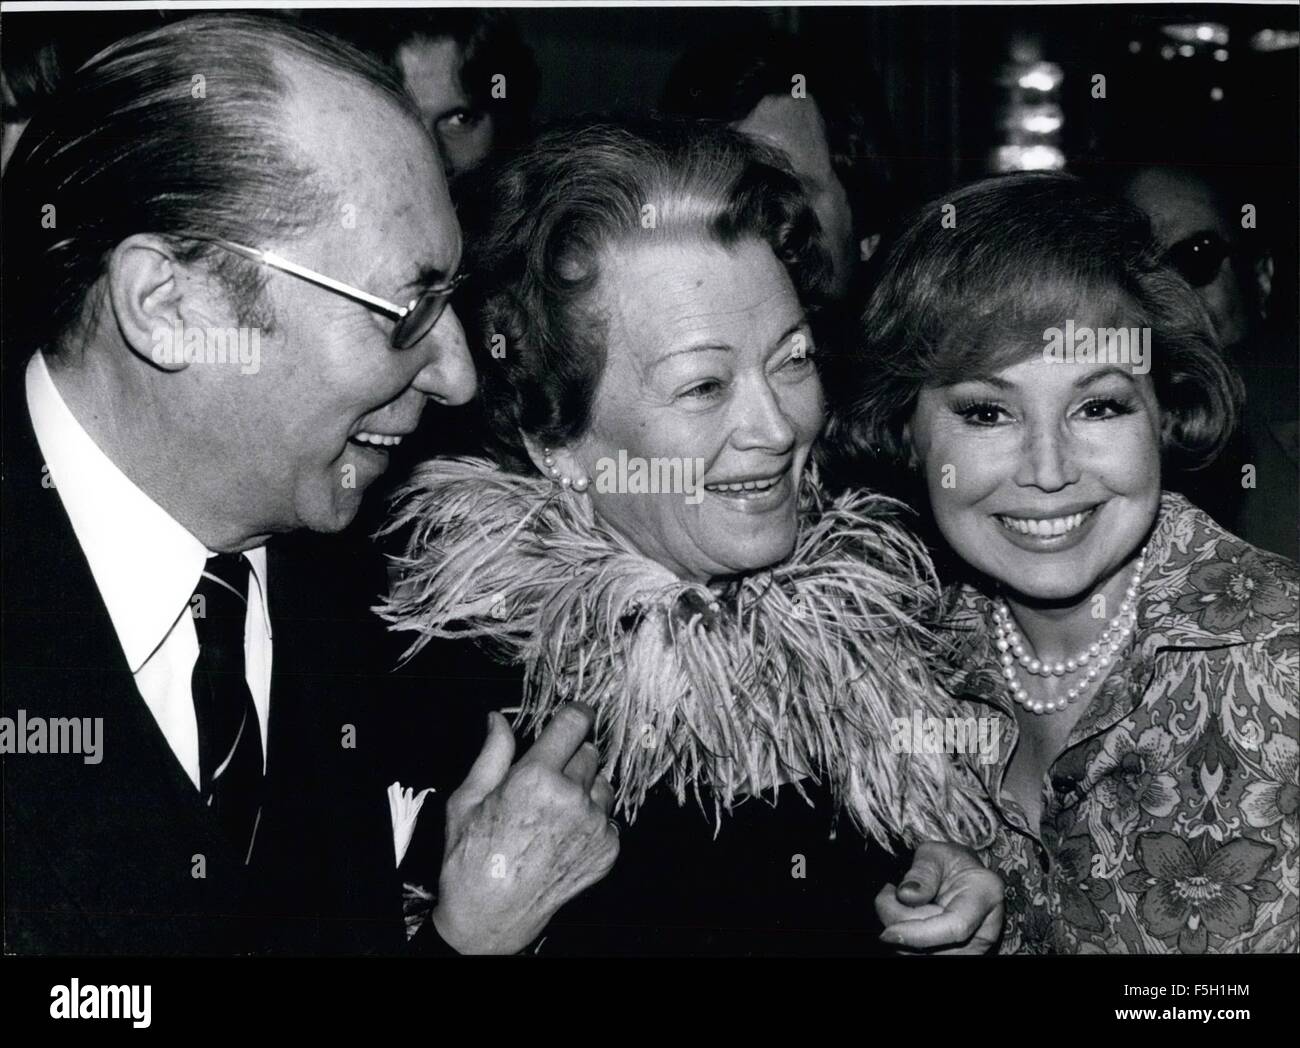 1977 - Olga Tschechowa German actress and now successful owner of factory for cosmetics celebrated her 80th birthday (April 26, 1977) in a Munich Hotel. 400 personages from film, show business, politics and industry wished her many happy returns of the day. OPS:- Carl Raddartz (L), actor and partner of Olga Tschechowa in a lot of films, and famous German singer Annelise Rothenberger (R) congratulating the person celebrating her birthday (middle) © Keystone Pictures USA/ZUMAPRESS.com/Alamy Live News Stock Photo